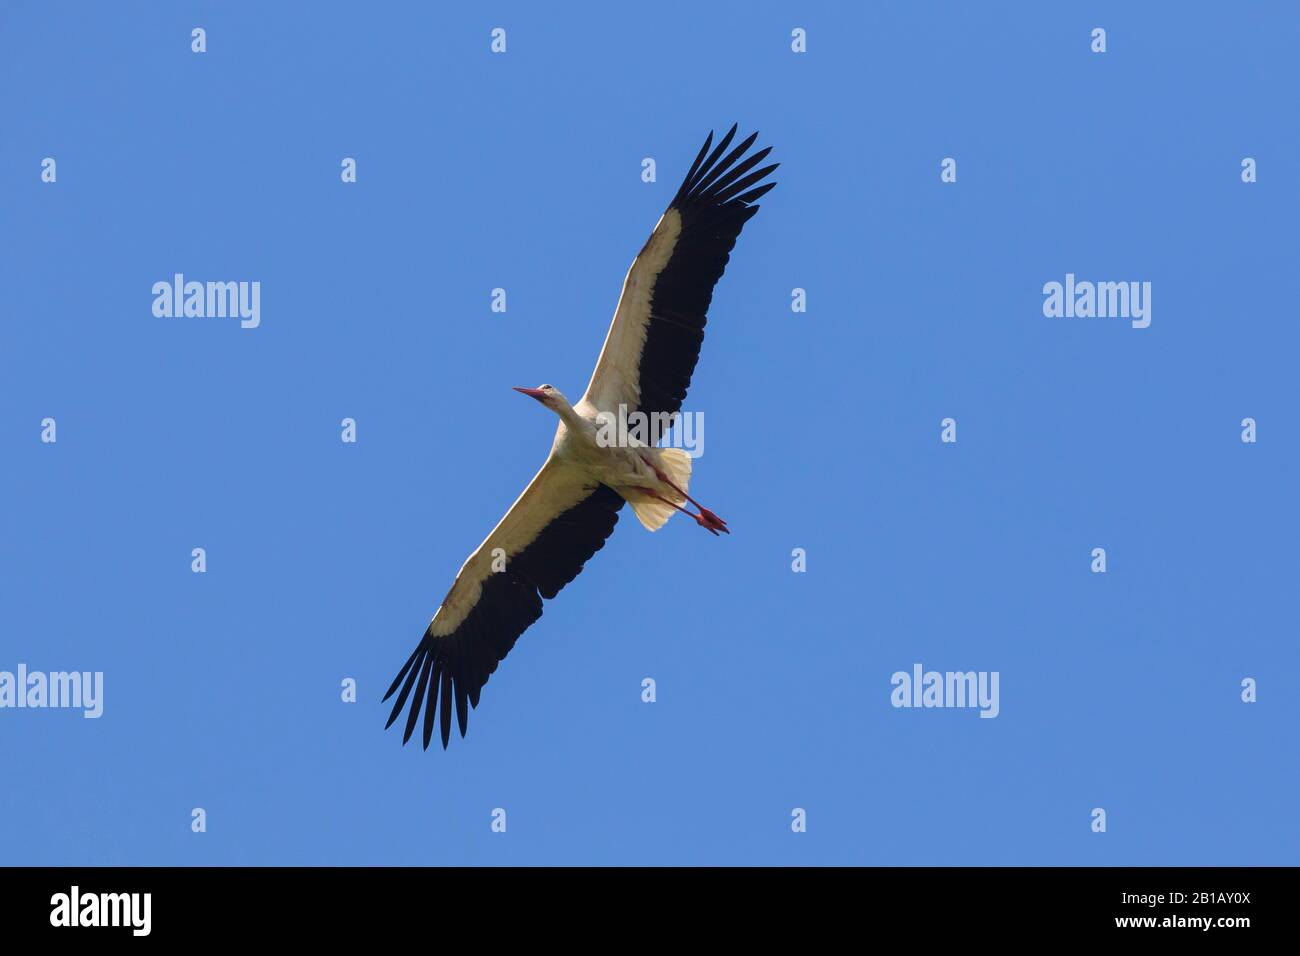 White stork (Ciconia ciconia) in flight soaring against blue sky in spring Stock Photo